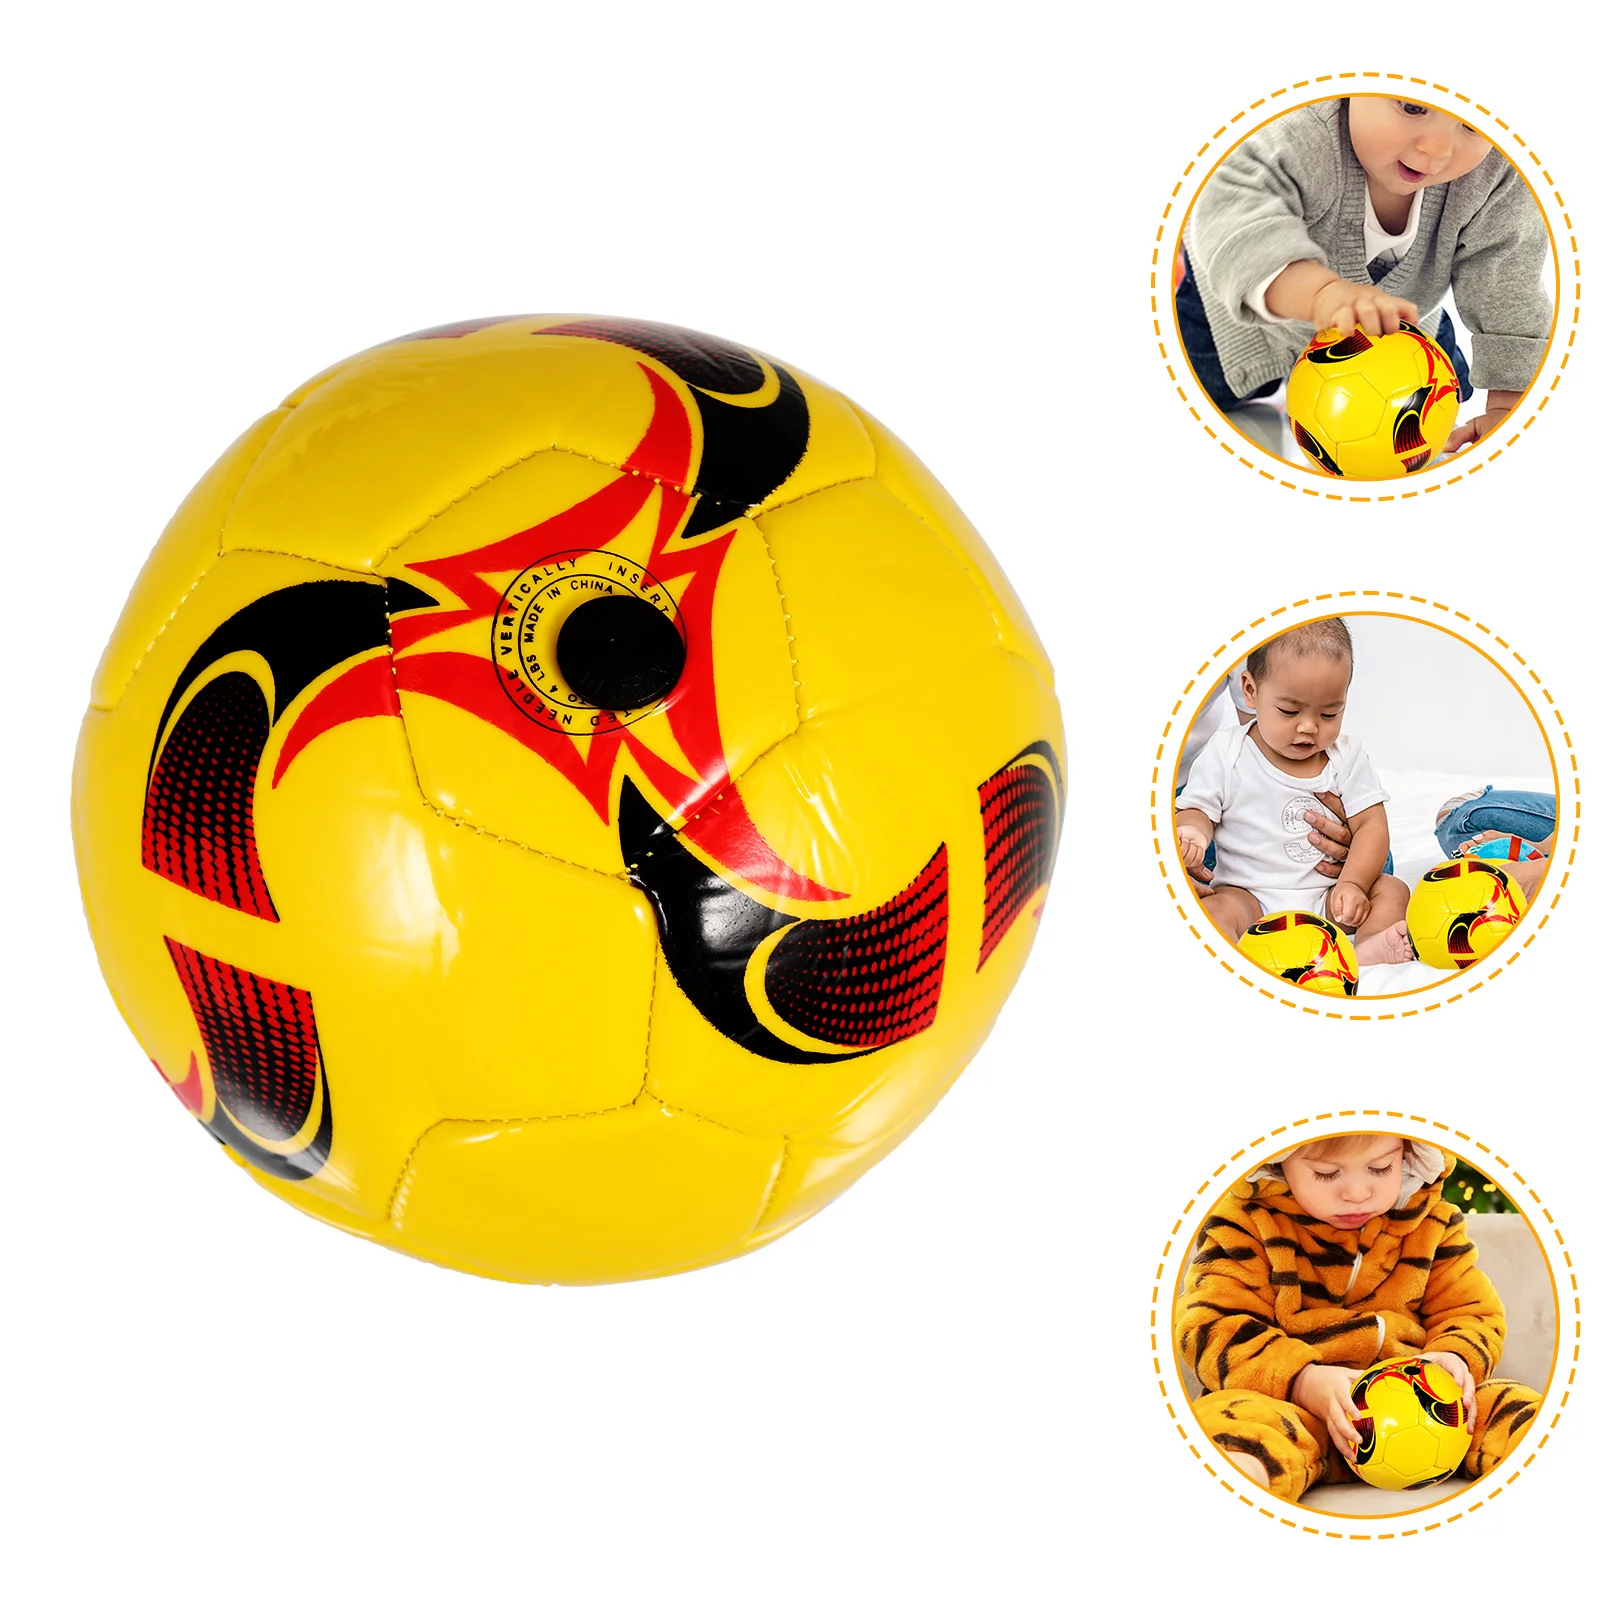 

Football Wear-resistant Soccer Toy Adorable Mini Kids Supply Children Accessory Interesting